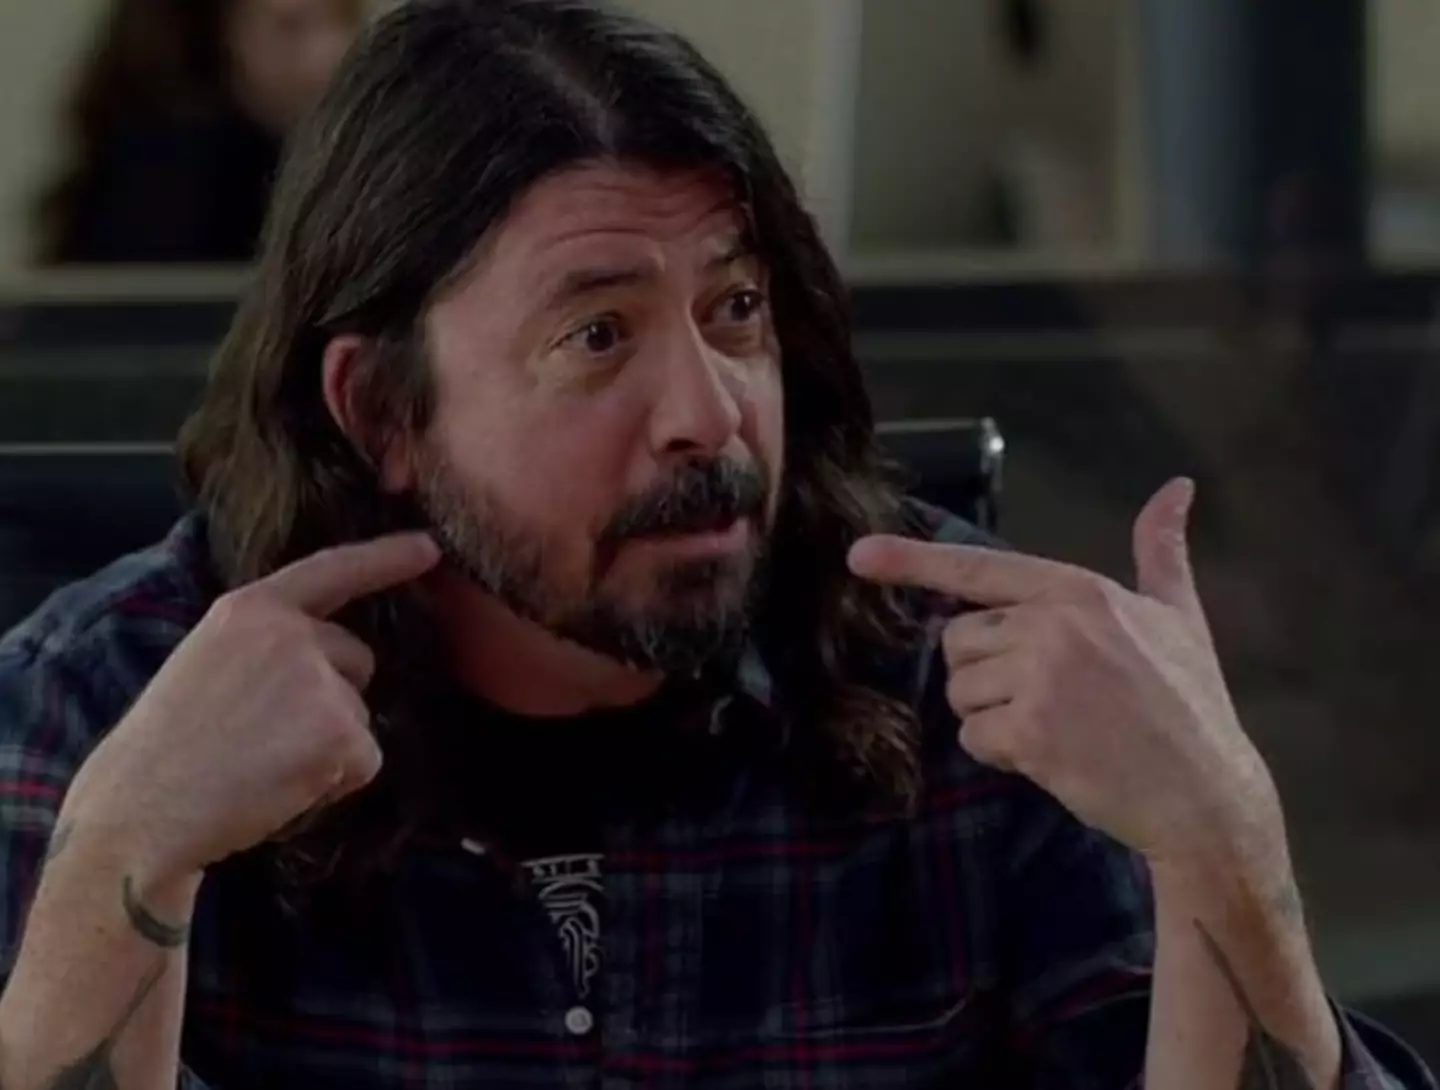 Dave Grohl becomes a whole new person in the movie.